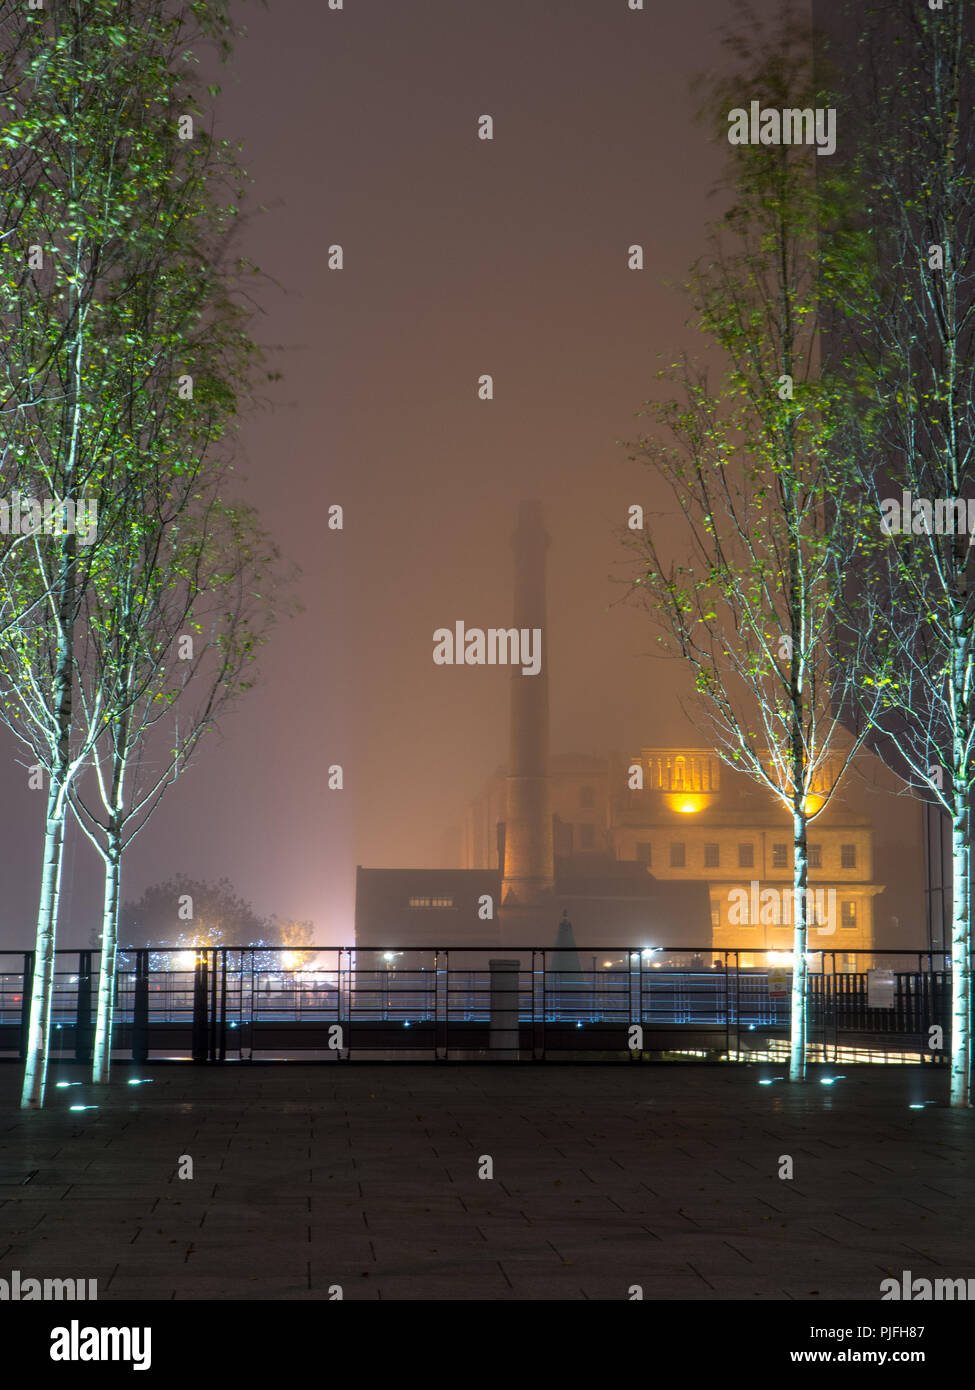 Liverpool, England, UK - November 1, 2015: The Victorian Canning Dock Pump House and chimney shrouded in fog in Liverpool Docks. Stock Photo